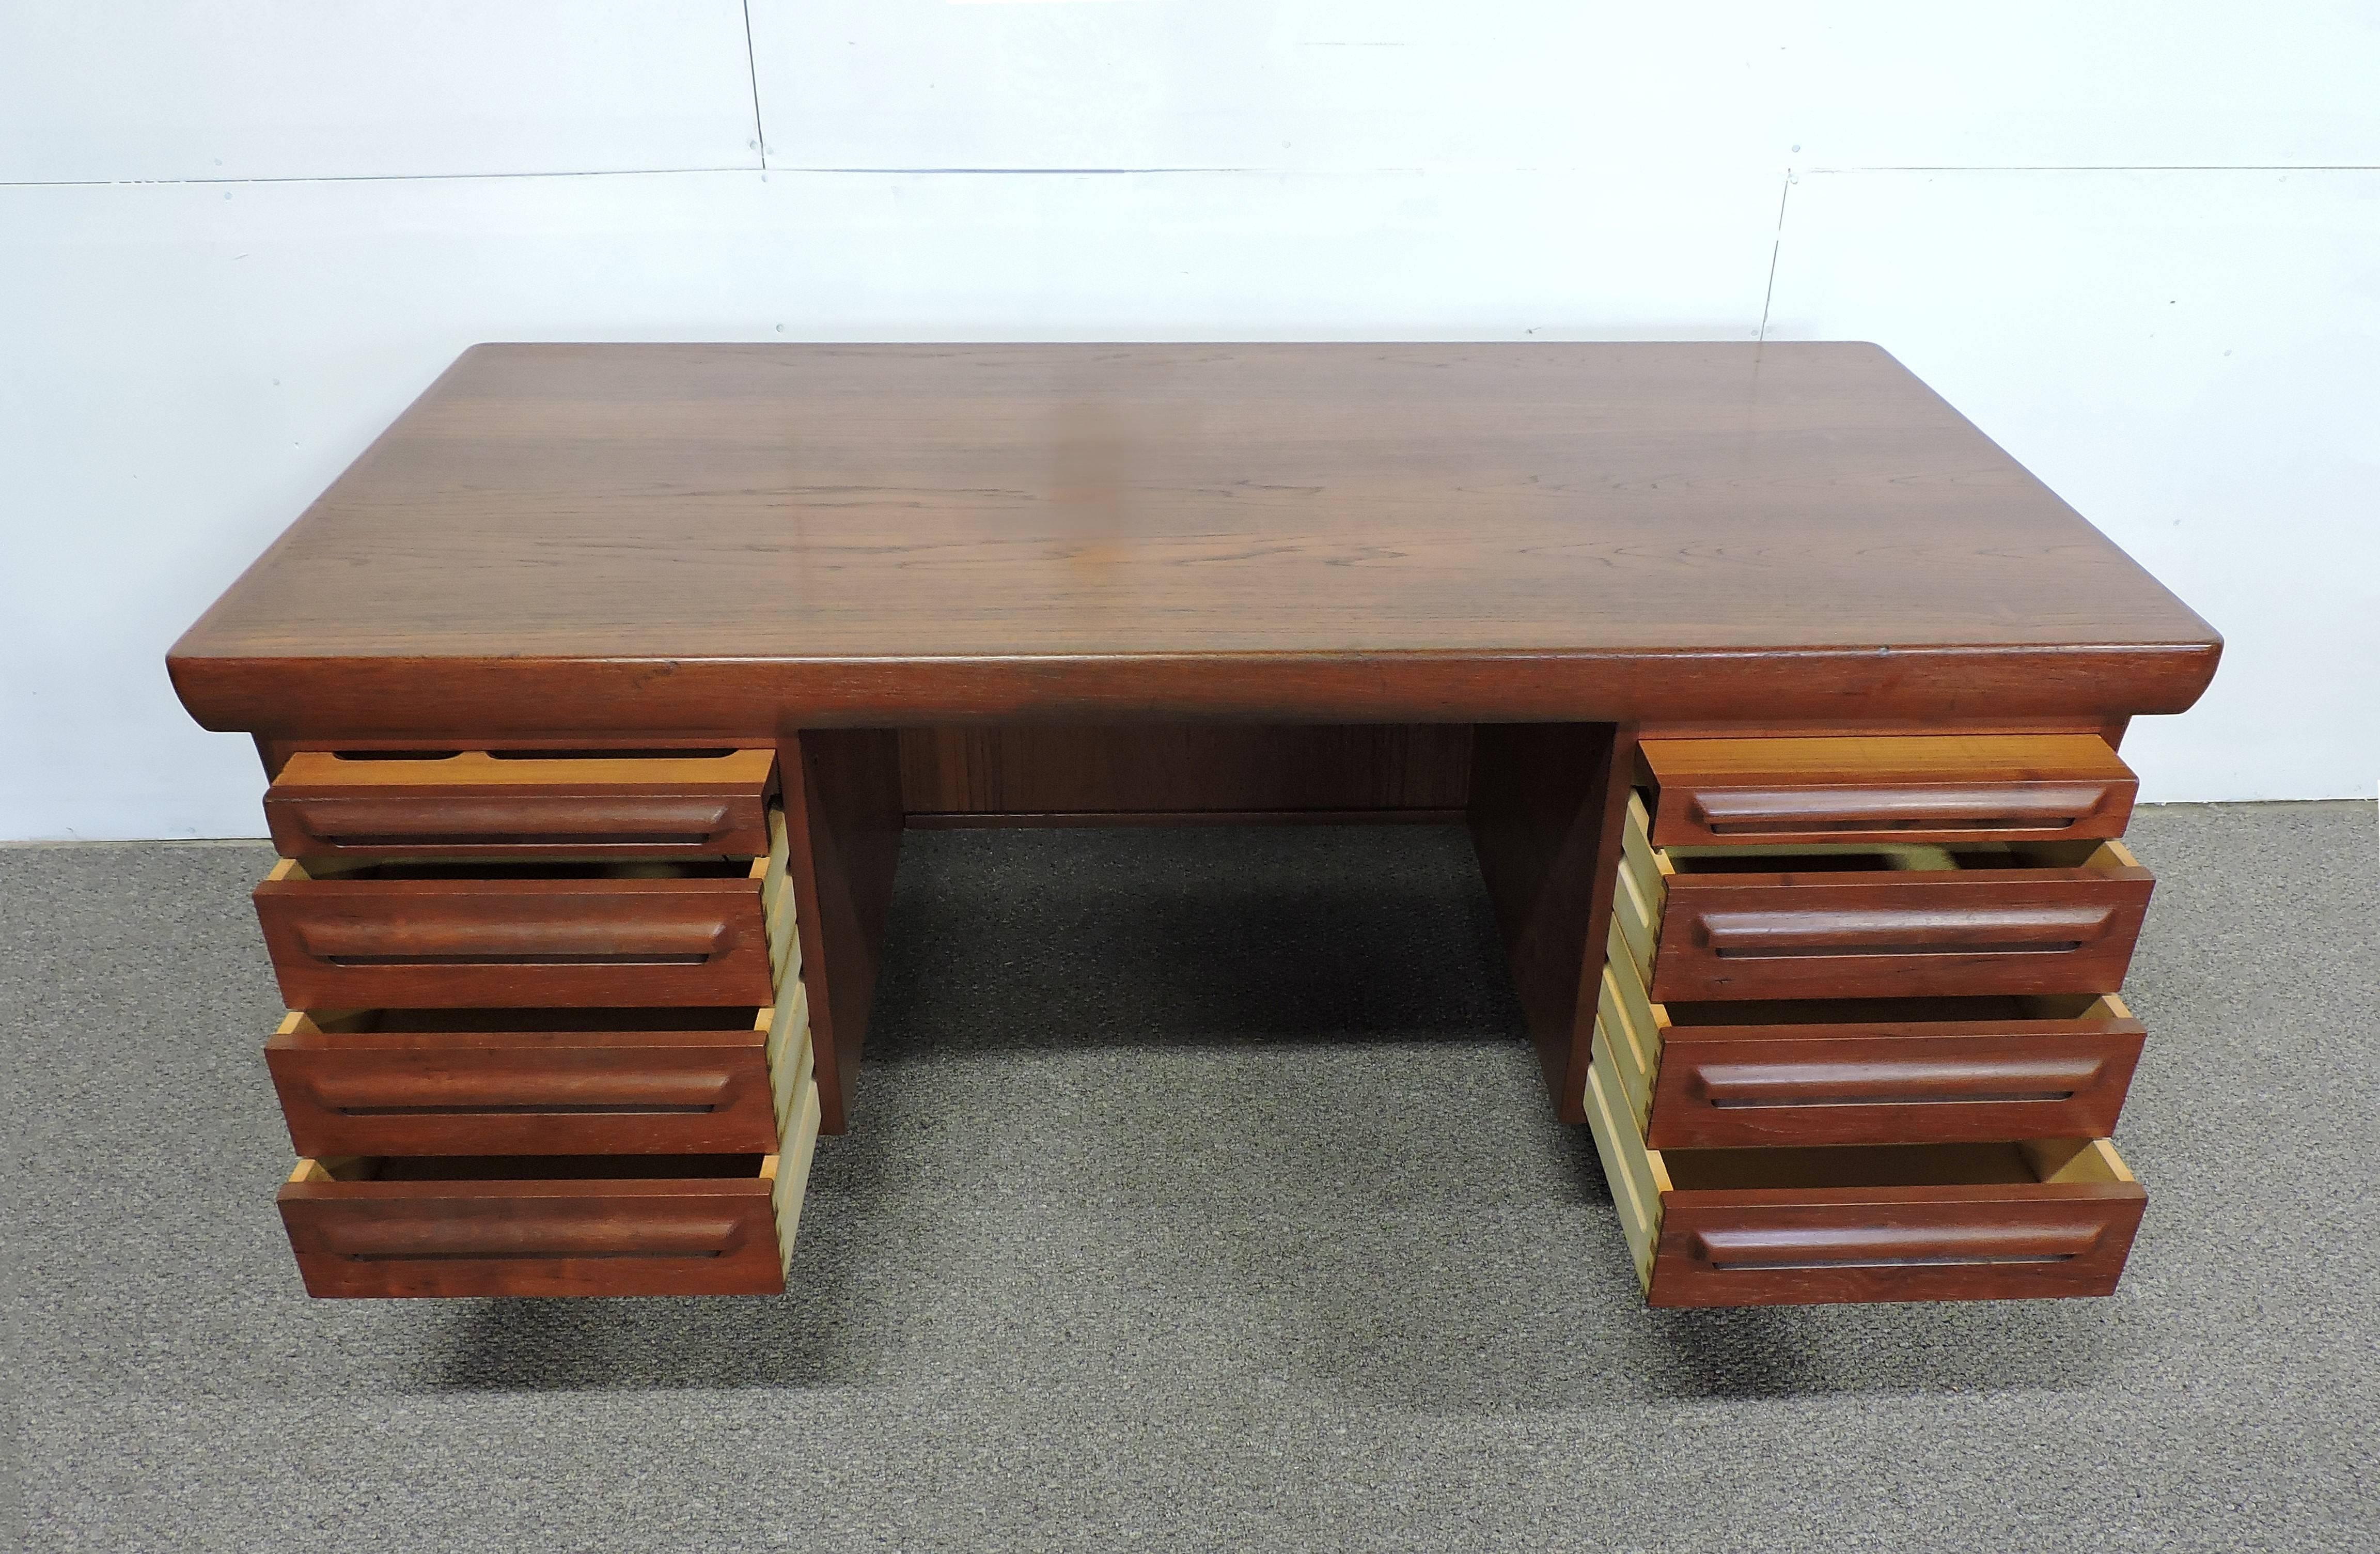 Large and impressive Danish modern teak executive desk designed by Ib Kofod Larsen and made in Denmark by Faarup Mobelfabrik. This very well crafted desk has six drawers and two pull-out trays, all with sculpted teak pulls. One of the trays has